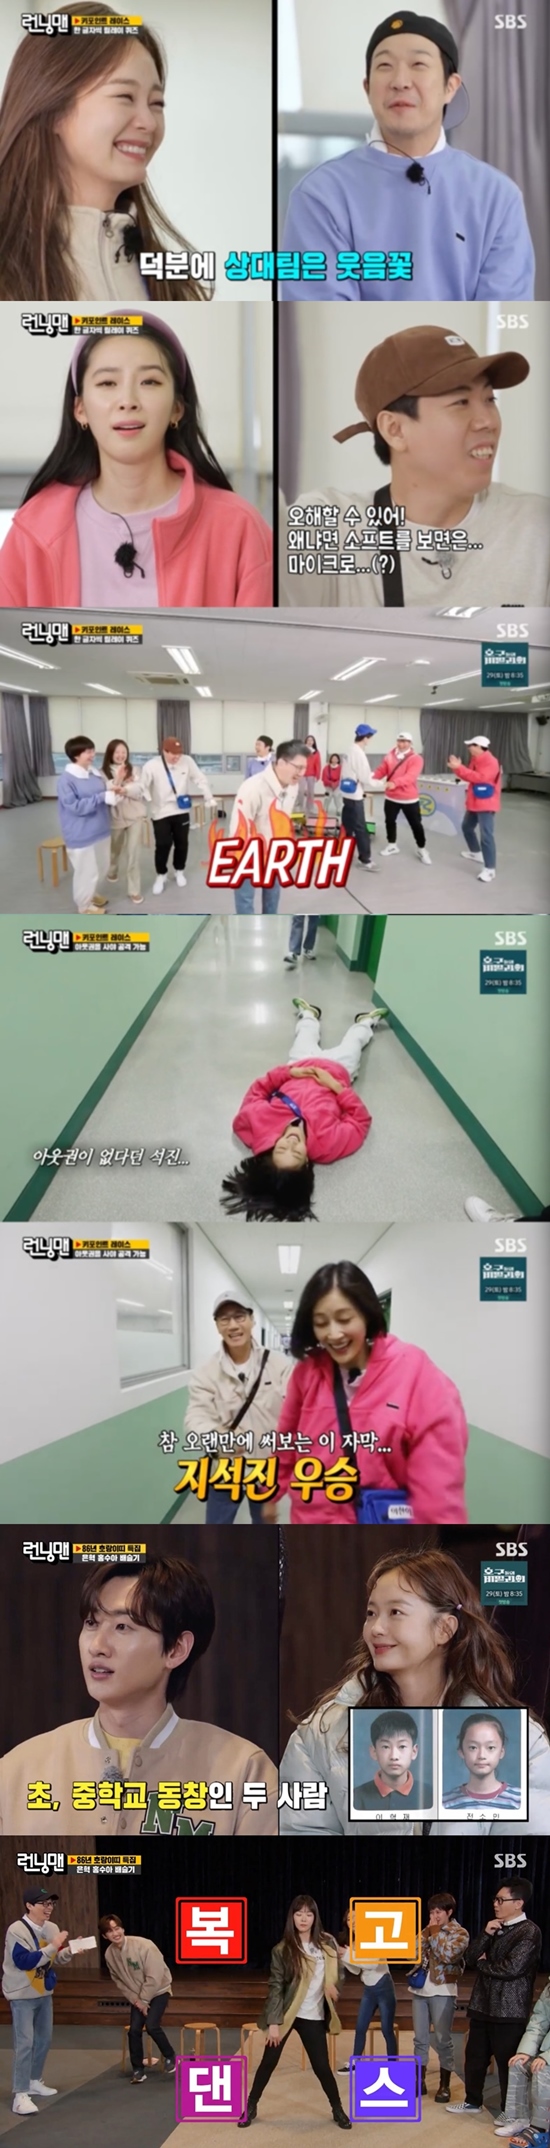 Running Man, which aired on the 23rd, ranked first in the same time zone with a target index of 3.4% of 2049 ratings (hereinafter based on Nielsen Korea metropolitan area and households), with an average audience rating of 5.4% and the highest audience rating per minute of 8.1%.The broadcast was welcomed by the emergence of the signature Name-topping Game of Running Man as the second key point race was released last week.If you find five acorns hidden in the building and point out someone and buy the In-N-Out Burger right, you can take off the name tag. From the beginning, Joo Jae joined with Yoo Jae-Suk and dropped Haha first.Lee Hyun combined Kim Jong-kook and Heap to remove Songhai and then played a big role in In-N-Out Burger to Joo Woo-jae, Yang Se-chan and Jeon So-min.However, Ji Seok-jin removed the name tag of Kim Jong-kook, who was weak, and soon after that Lee Hyun was removed.The final penalties were Song Ji-hyo, Jeon So-min and Songhai, among which Song Ji-hyo and Jeon So-min were given fresh cream penalties.On the other hand, the 86-line Super Junior Eunhyuk, actor Bae Seul-Ki, and Hong Soo-ahs Tiger and Bear Race were also released on the show.The members of Running Man cheered on the appearance of guests who once swept entertainment.In particular, Eunhyuk said that he had attended the same elementary school, Middle School, for 9 years, and that Jeon So-min was a bit obsessed with love at that time.In addition, Bae Seul-Ki embarrassed Yoo Jae-Suk, saying, I did not receive a wedding invitation to Yoo Jae-Suk, but I went to a wedding ceremony. Eventually, Yoo Jae-Suk laughed at the apology.Bae Seul-Ki also pointed to Yang Se-chan, saying, I sent a wedding invitation, but some people did not come. Jeon So-min told Yang Se-chan, Did you like Bae Seul-Ki?, and predicted 86-line talk, which was bitten and bitten.Bae Seul-Ki showed a retro dance of memories to raise the atmosphere, and this scene won the best one minute with 8.1% of the highest audience rating per minute.Photo = SBS